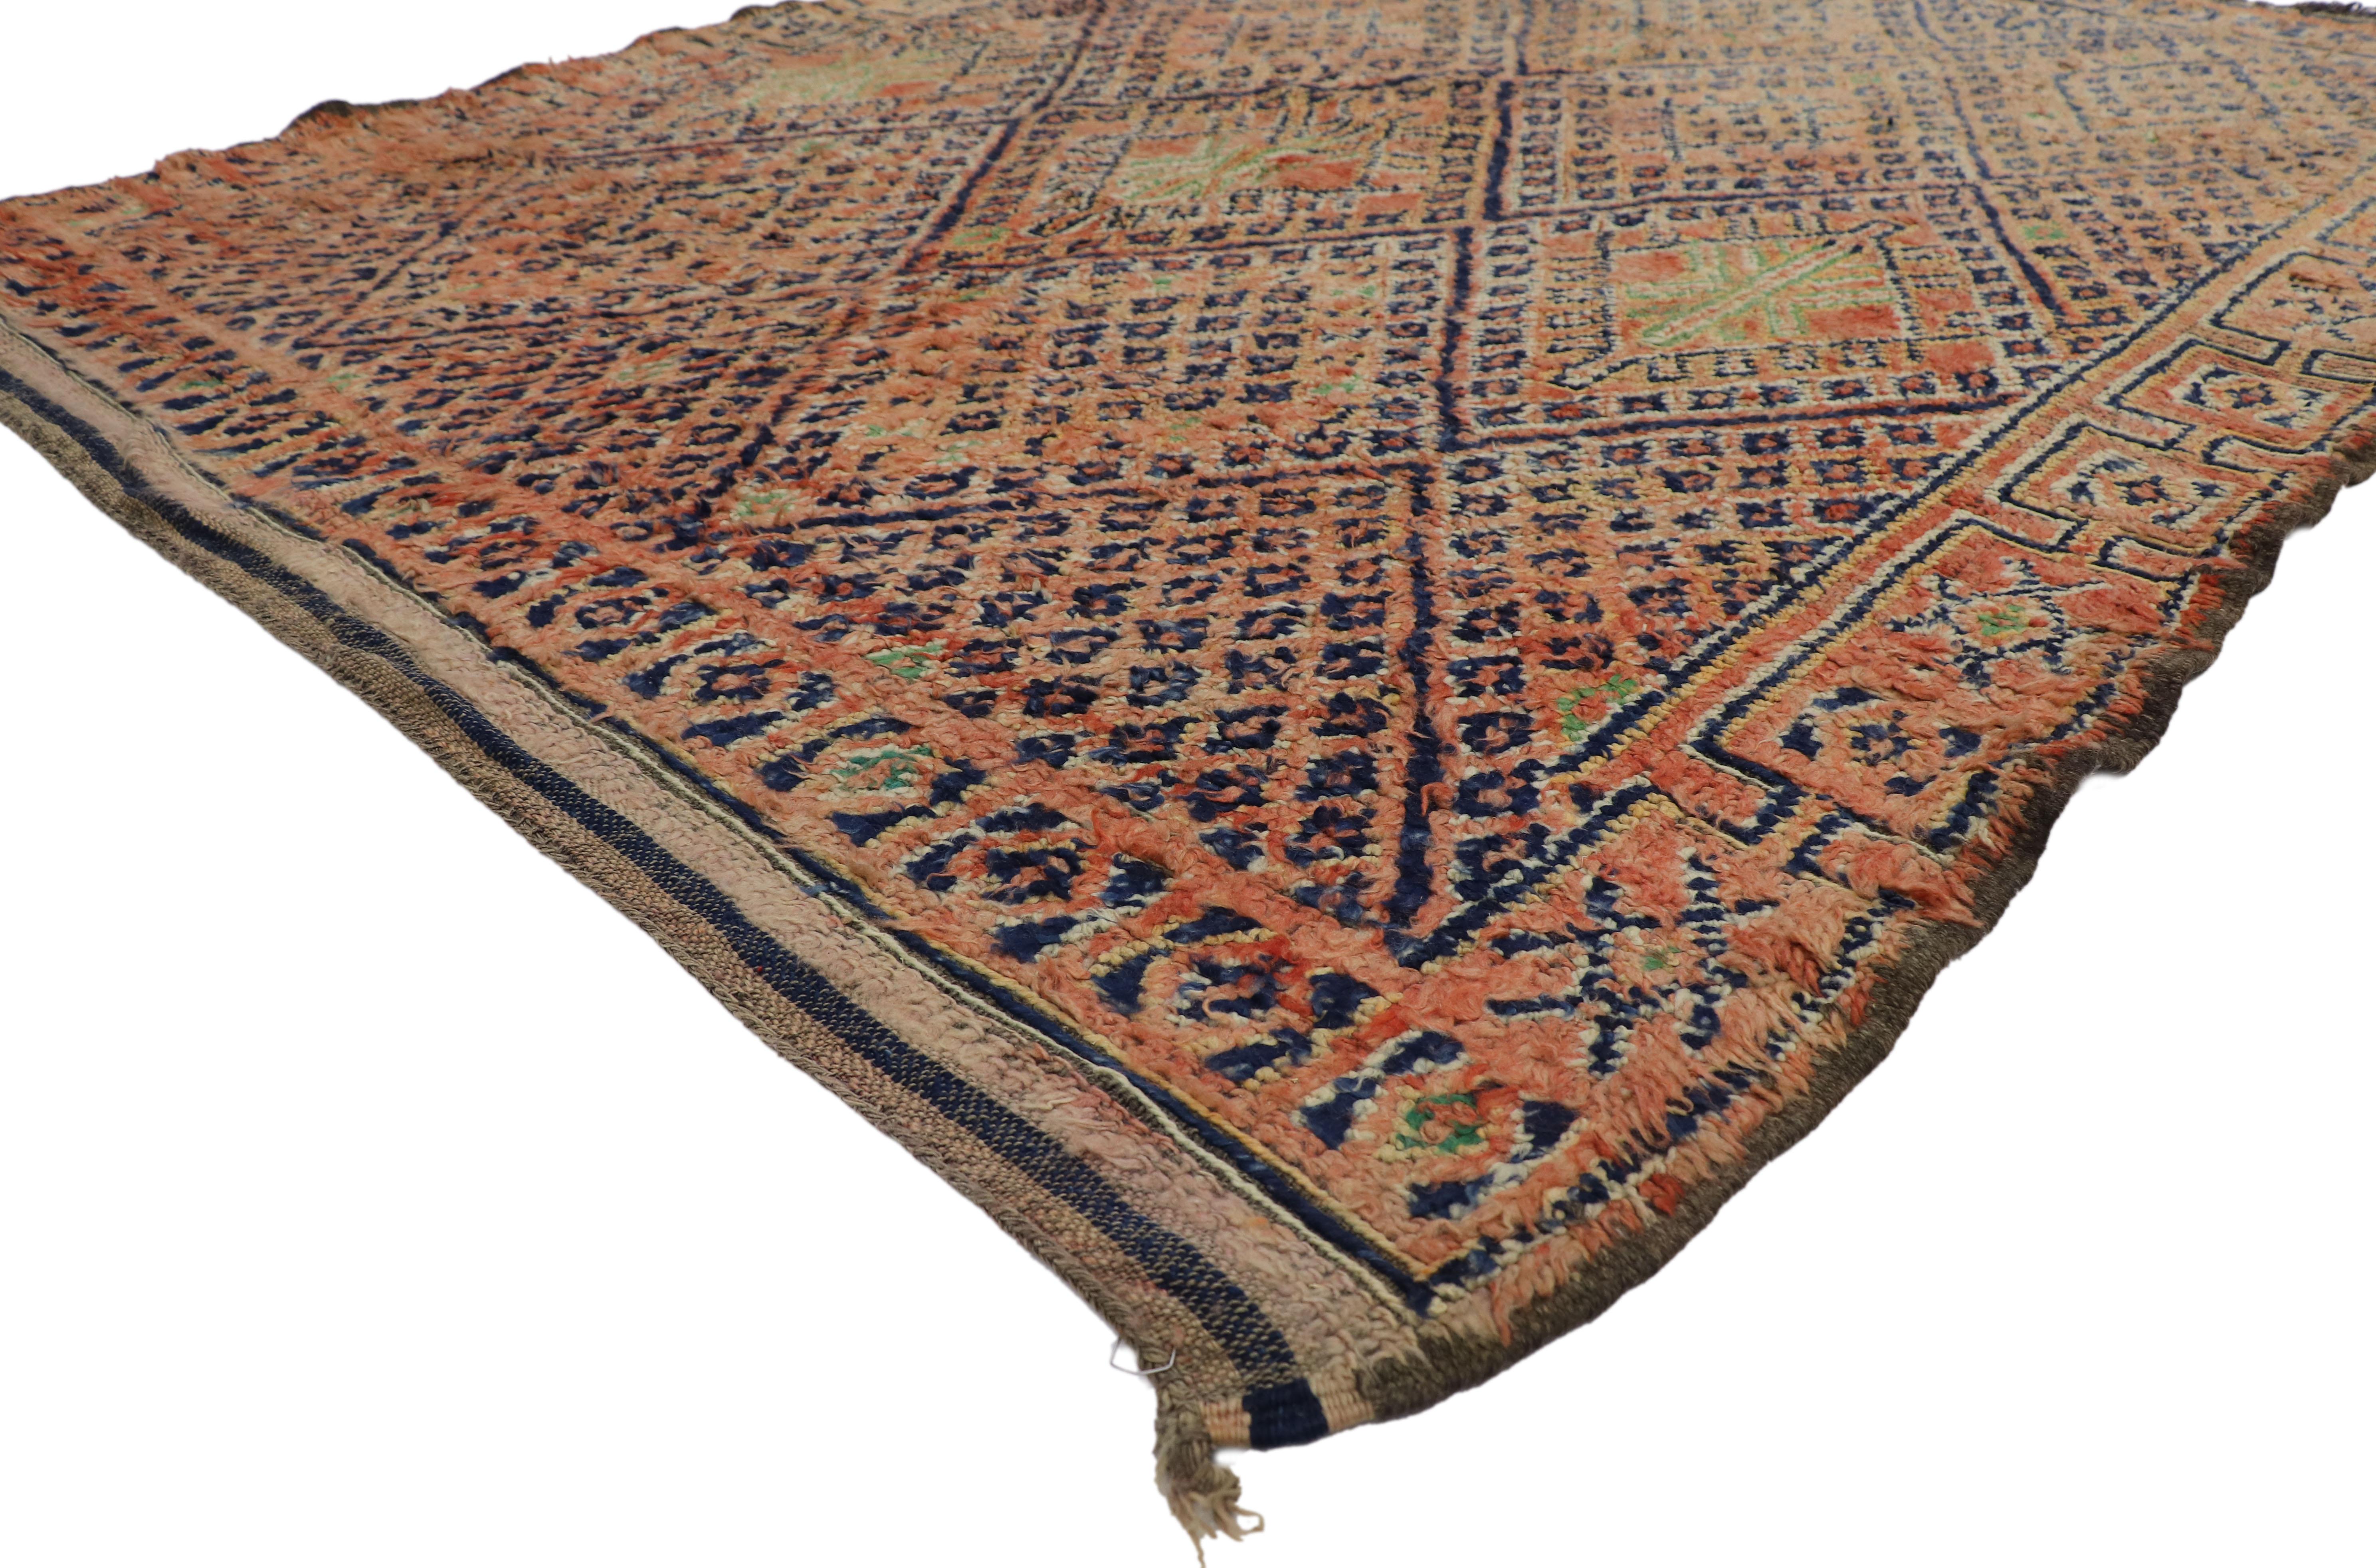 21499 Vintage Beni MGuild Moroccan Rug, 06'07 x 08'01.
Ultra cozy meets modern luxe in this hand-knotted wool vintage Beni MGuild Moroccan rug. The distinctive tribal lattice design and warm earthy colors woven into this piece work together to